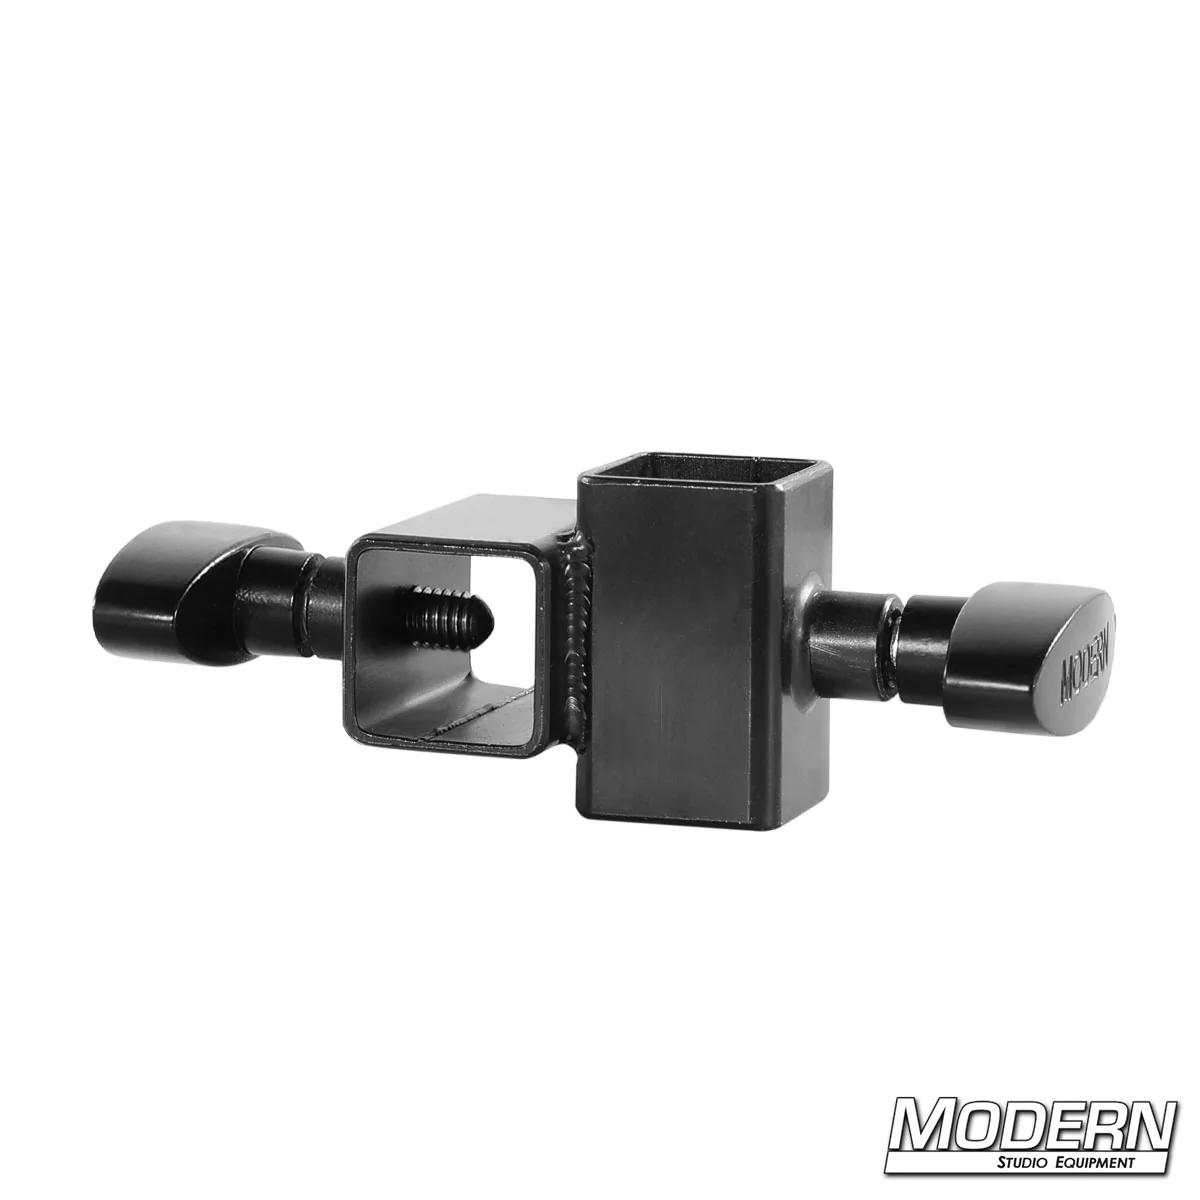 Mini Cross for 1" Square Tube - Black Zinc with T-Handles